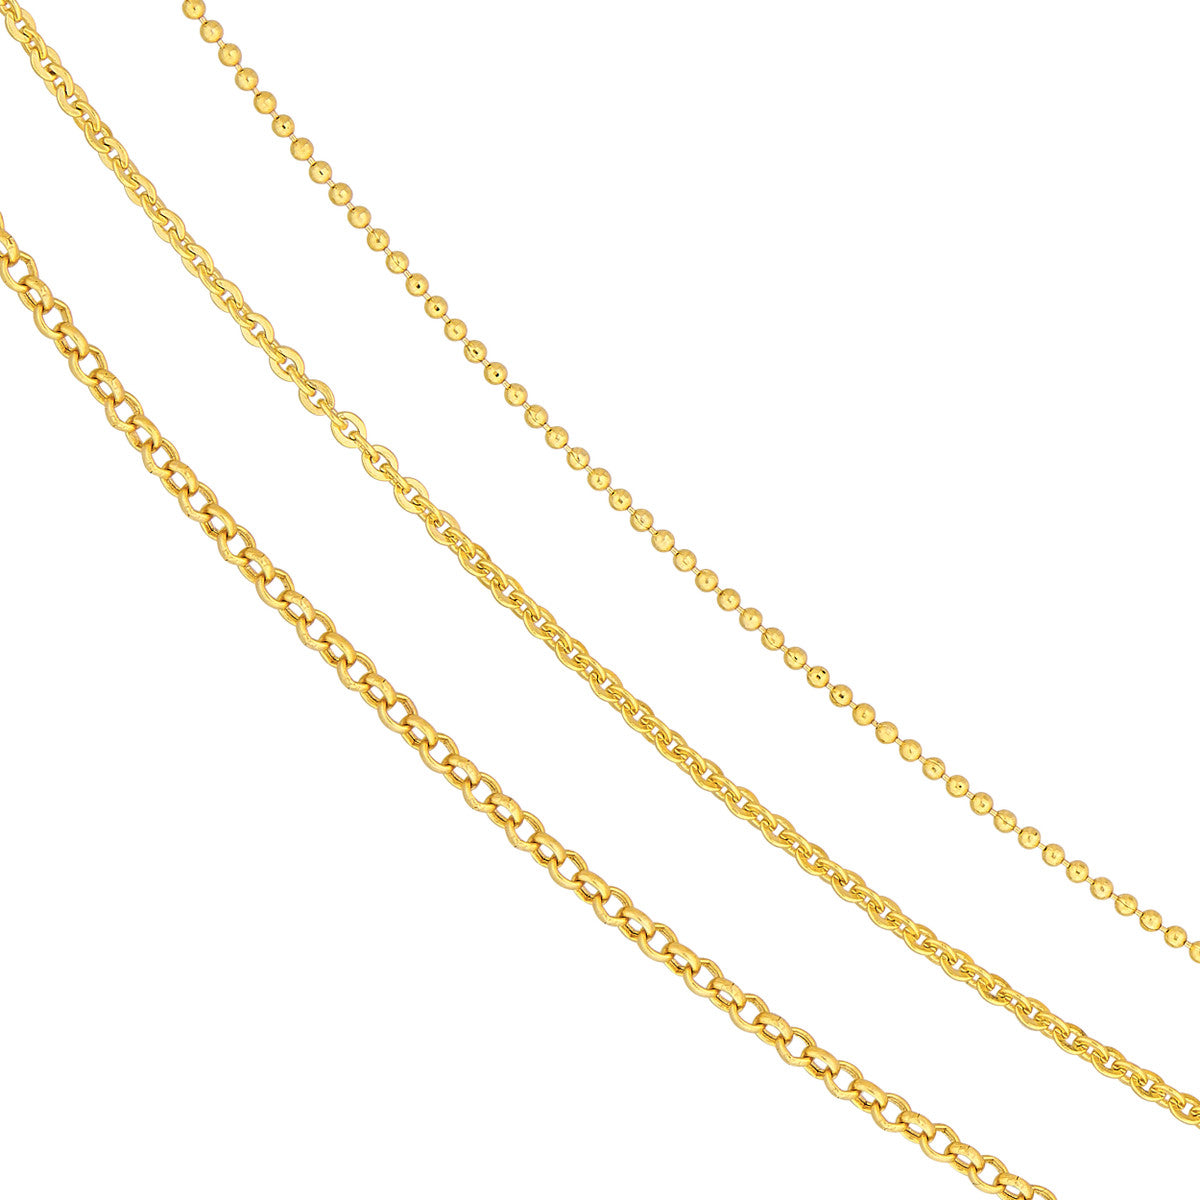 Roset Gold Label Triple Strand "Treble" Mixed Link Necklace